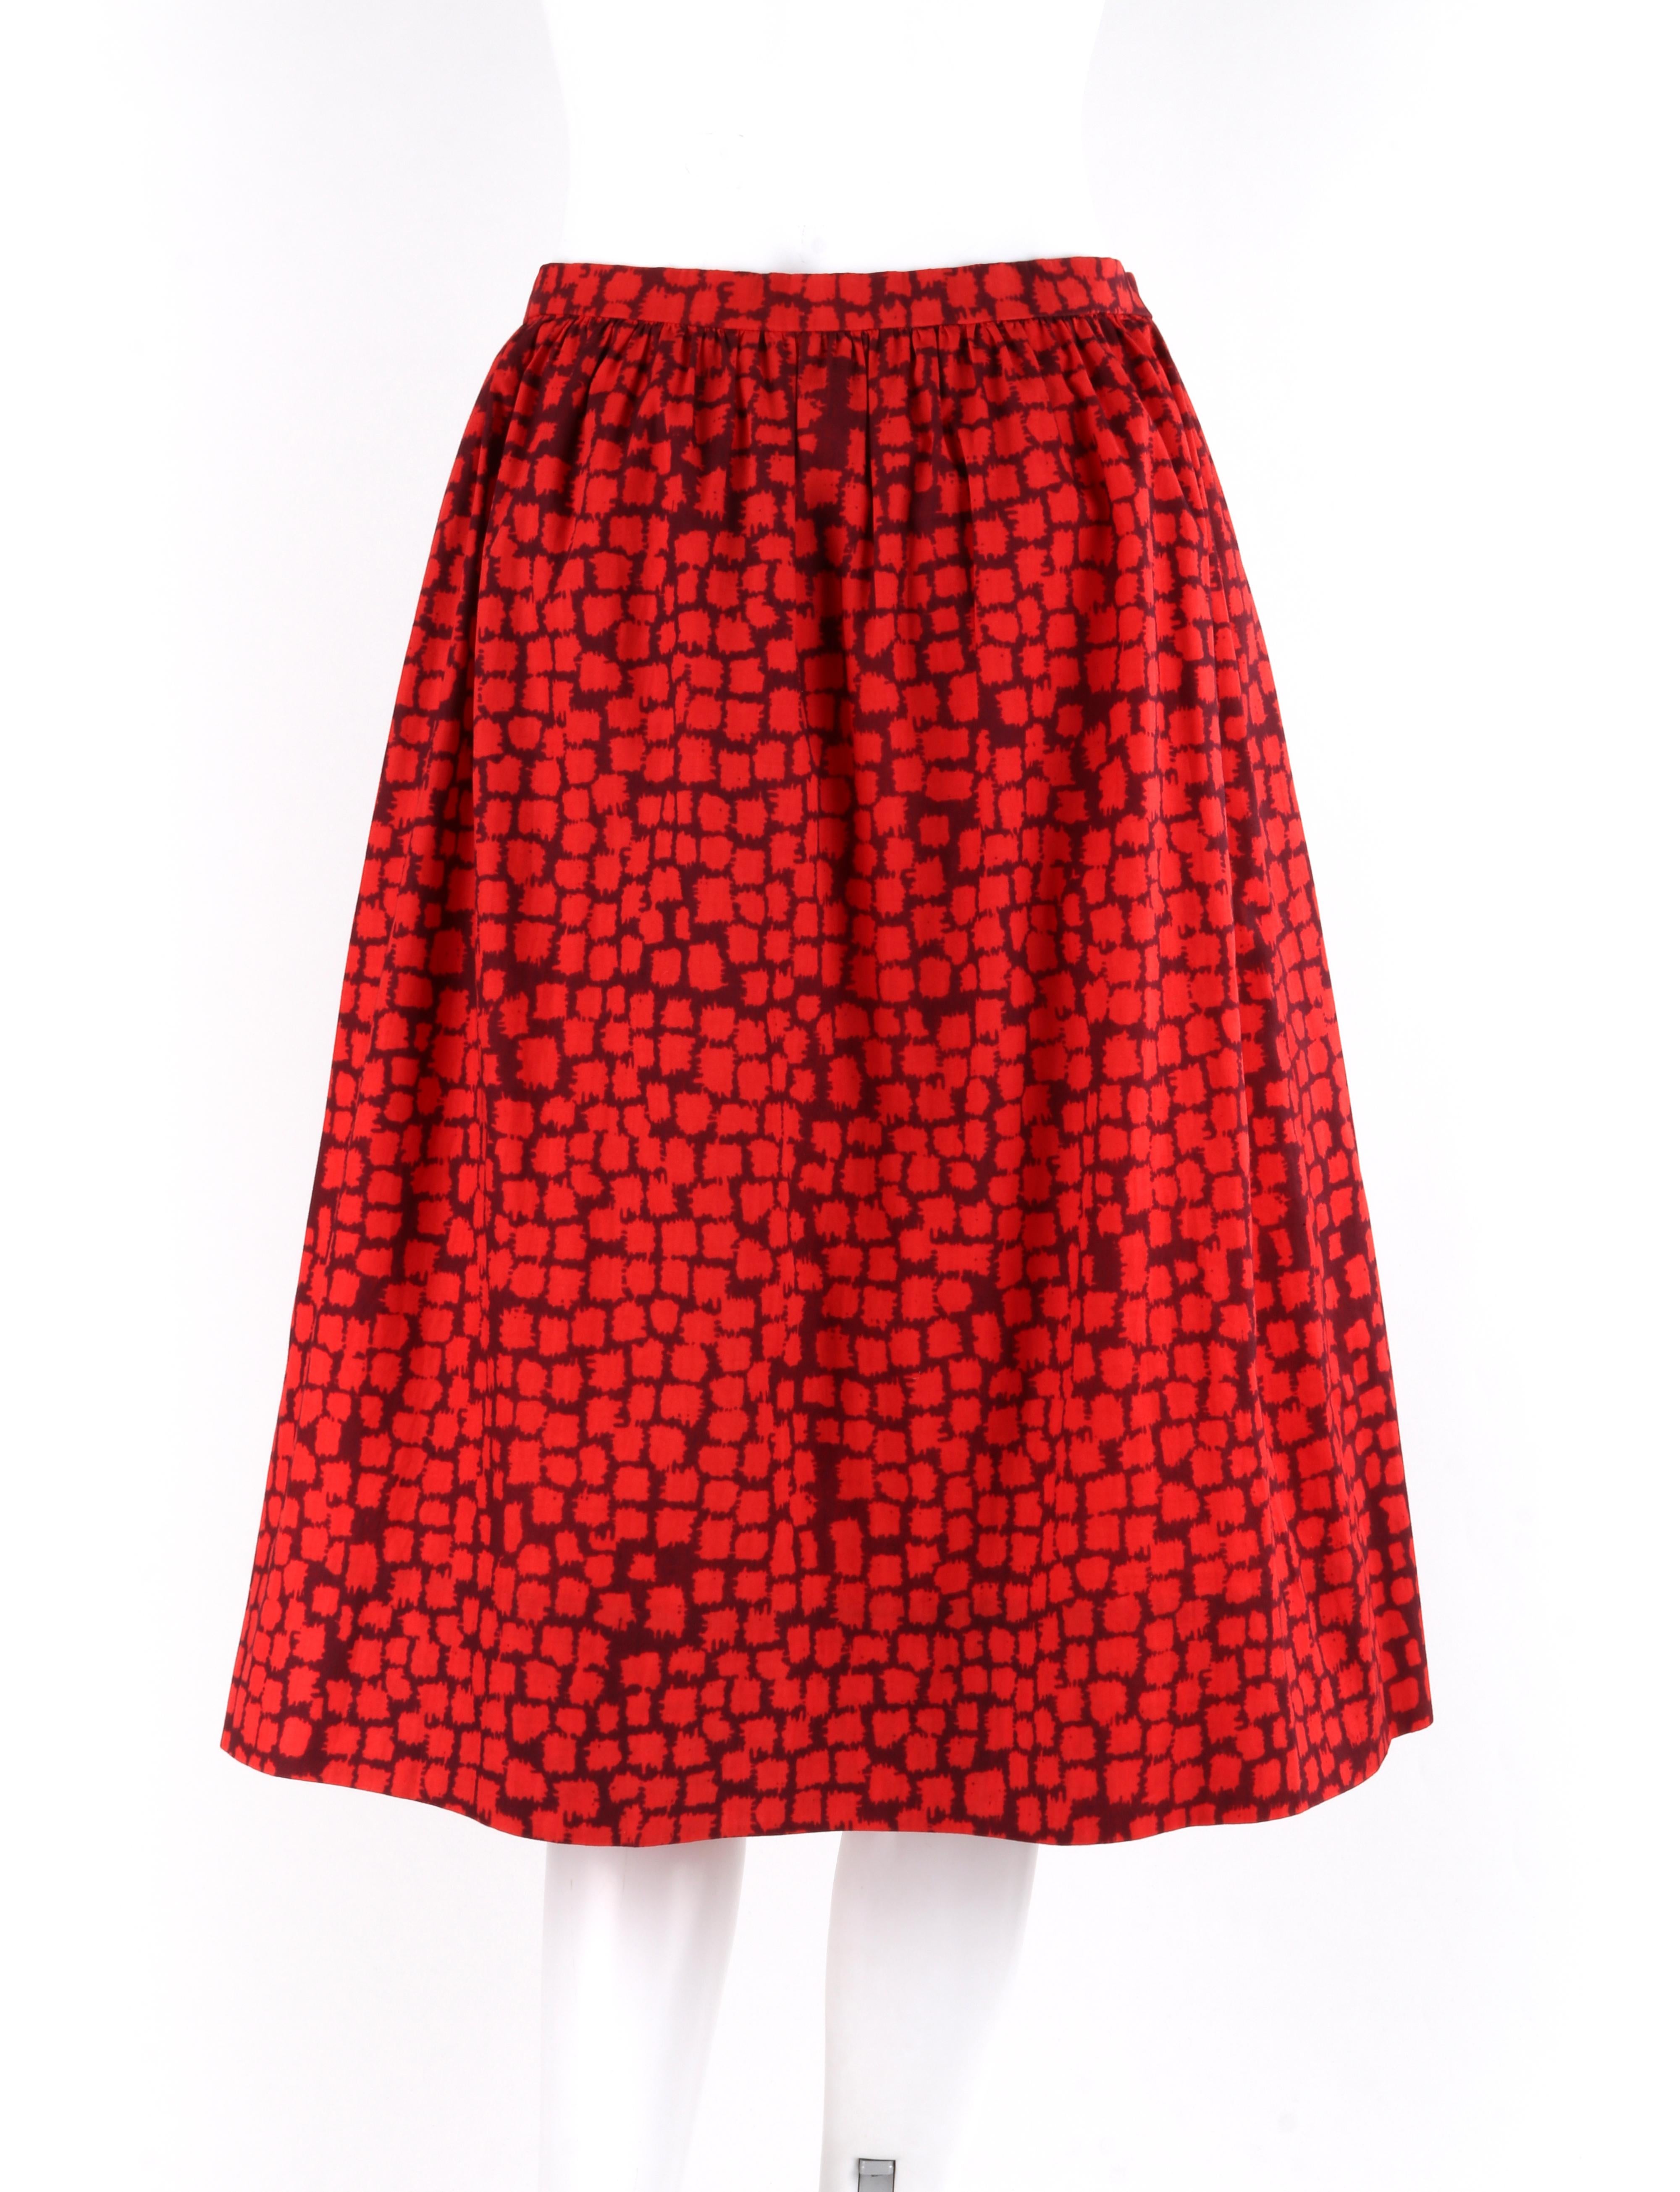 GIVENCHY c.1970’s Couture Numbered Red Geometric Gathered Tea Length Skirt For Sale 1